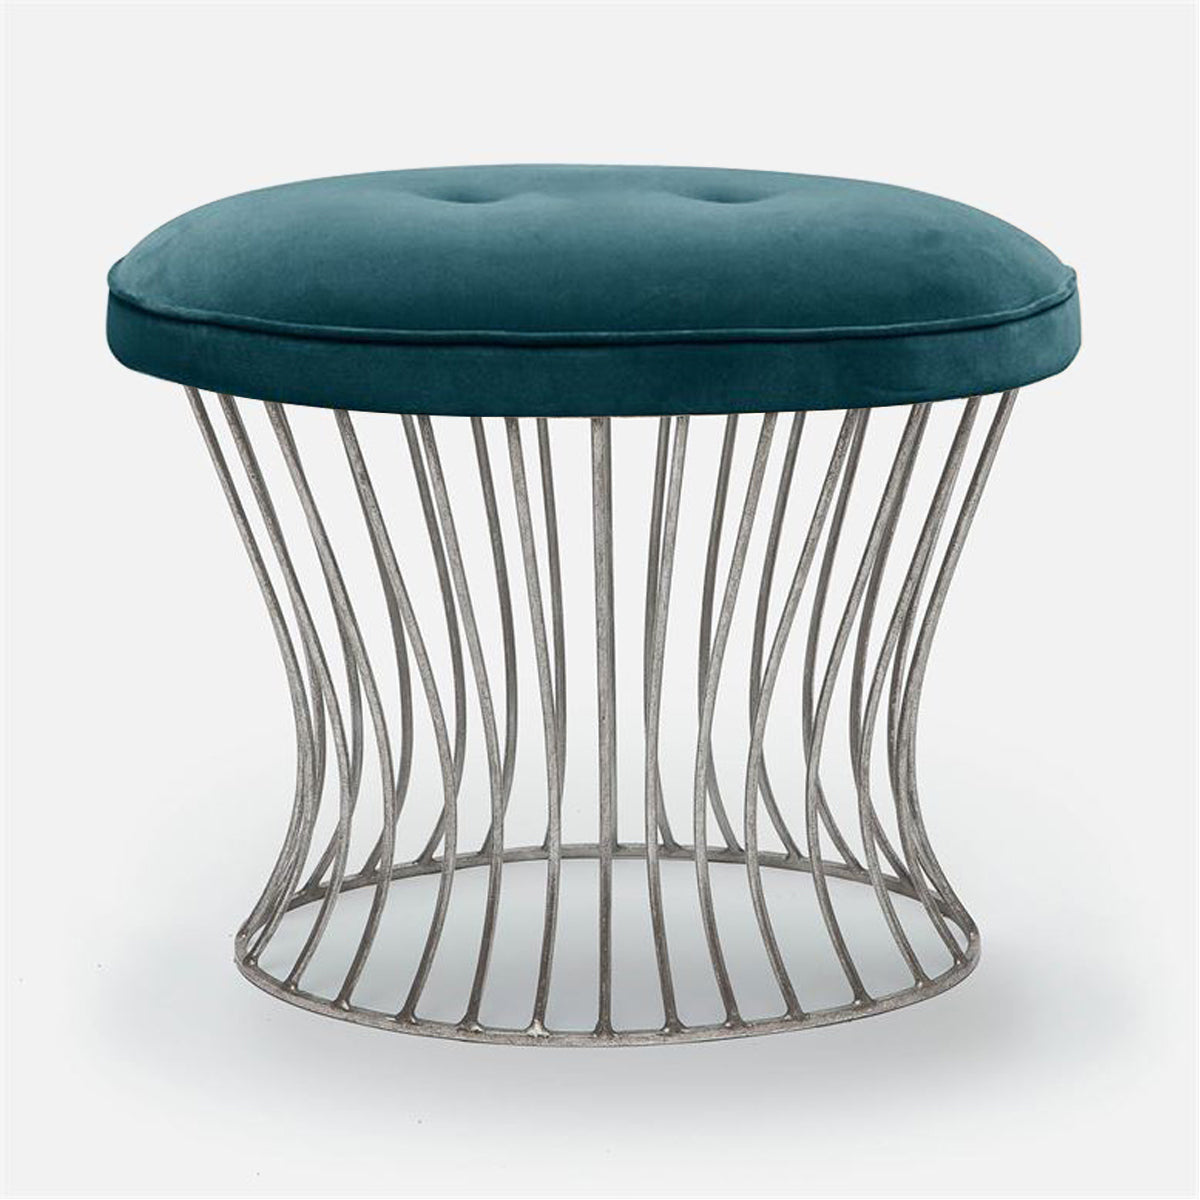 Made Goods Roderic Oval Stool in Rhone Navy Leather